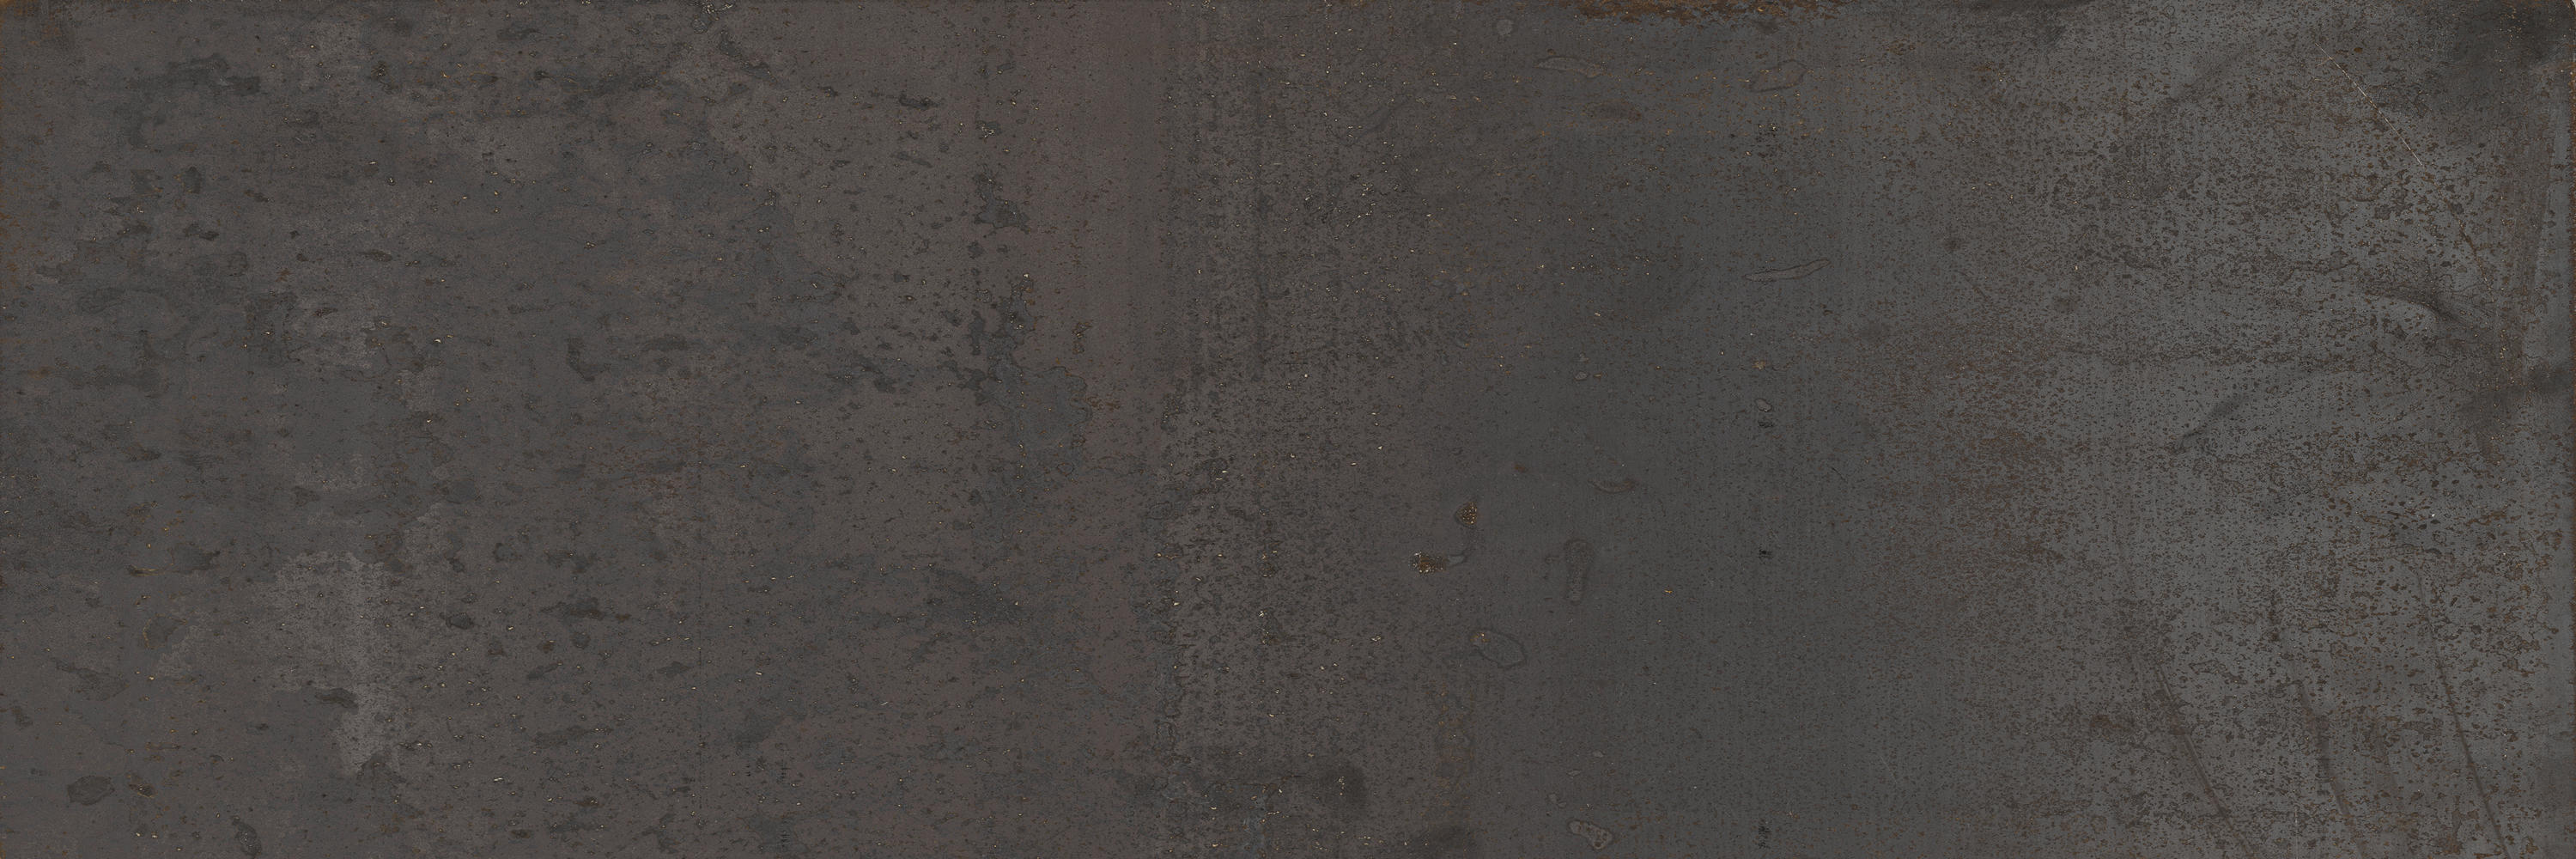 METAL | IRON - Ceramic tiles from Cotto d'Este | Architonic